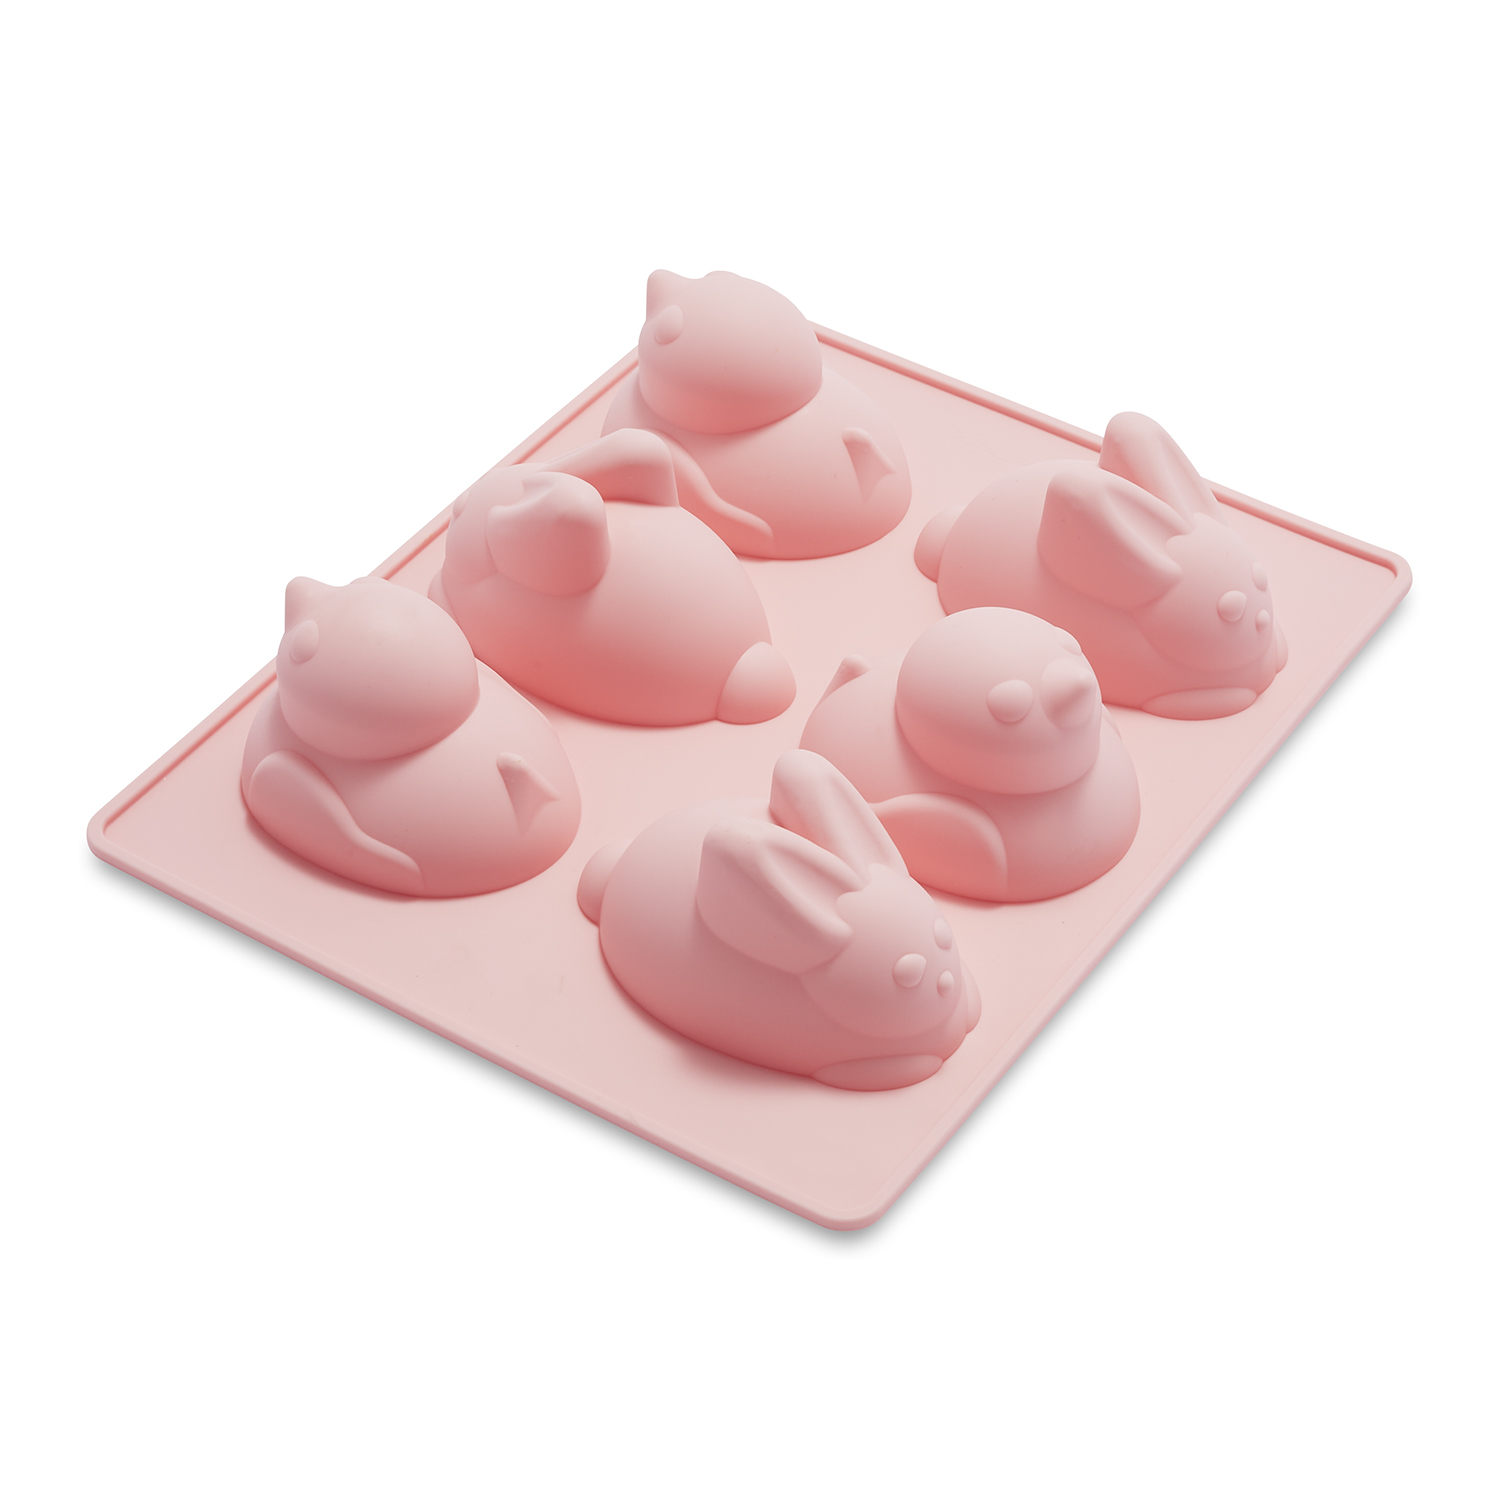 Bunny and Chick Silicone Mold, Set Of 2 | Sur La Table $4.99